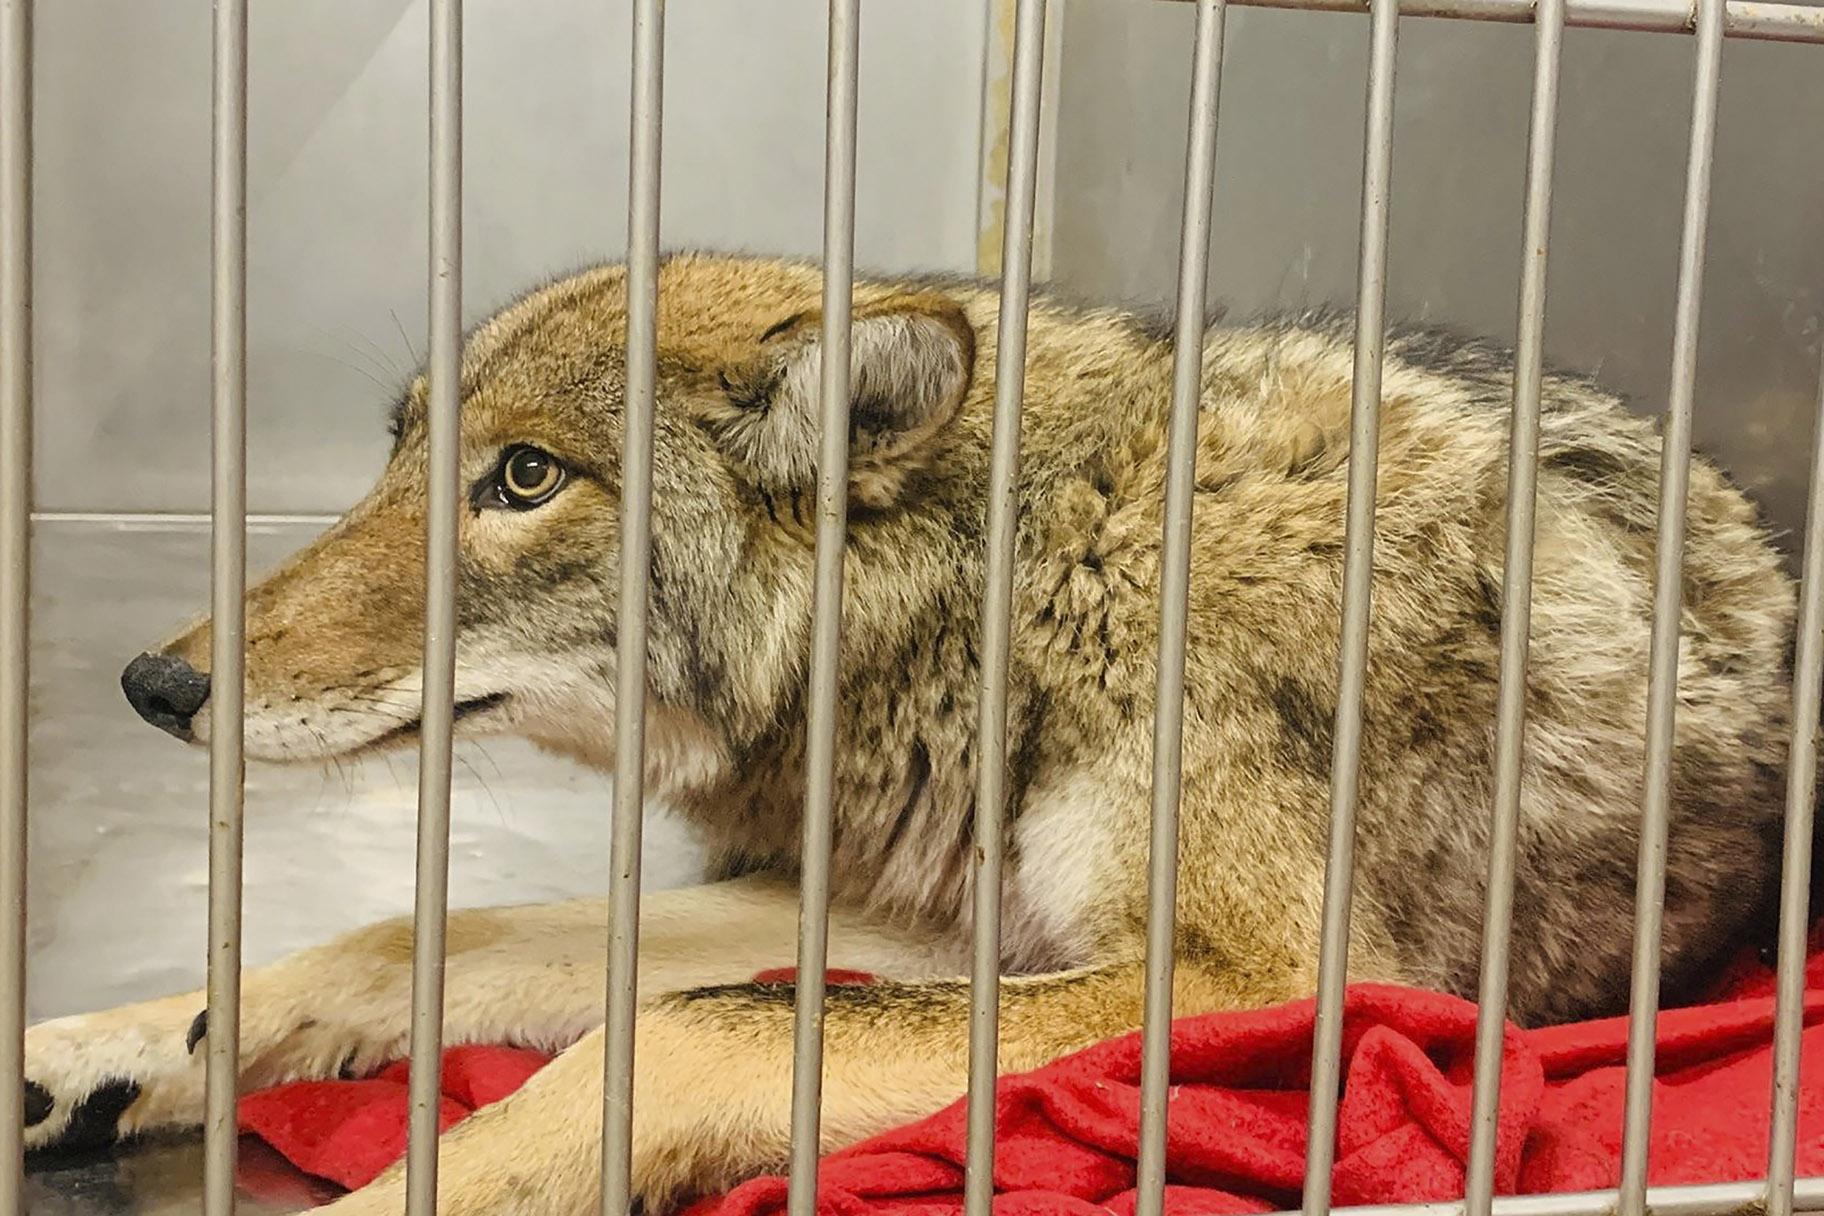 The injured coyote after it was captured by Chicago Animal Care and Control. (Chicago Animal Care and Control via AP)